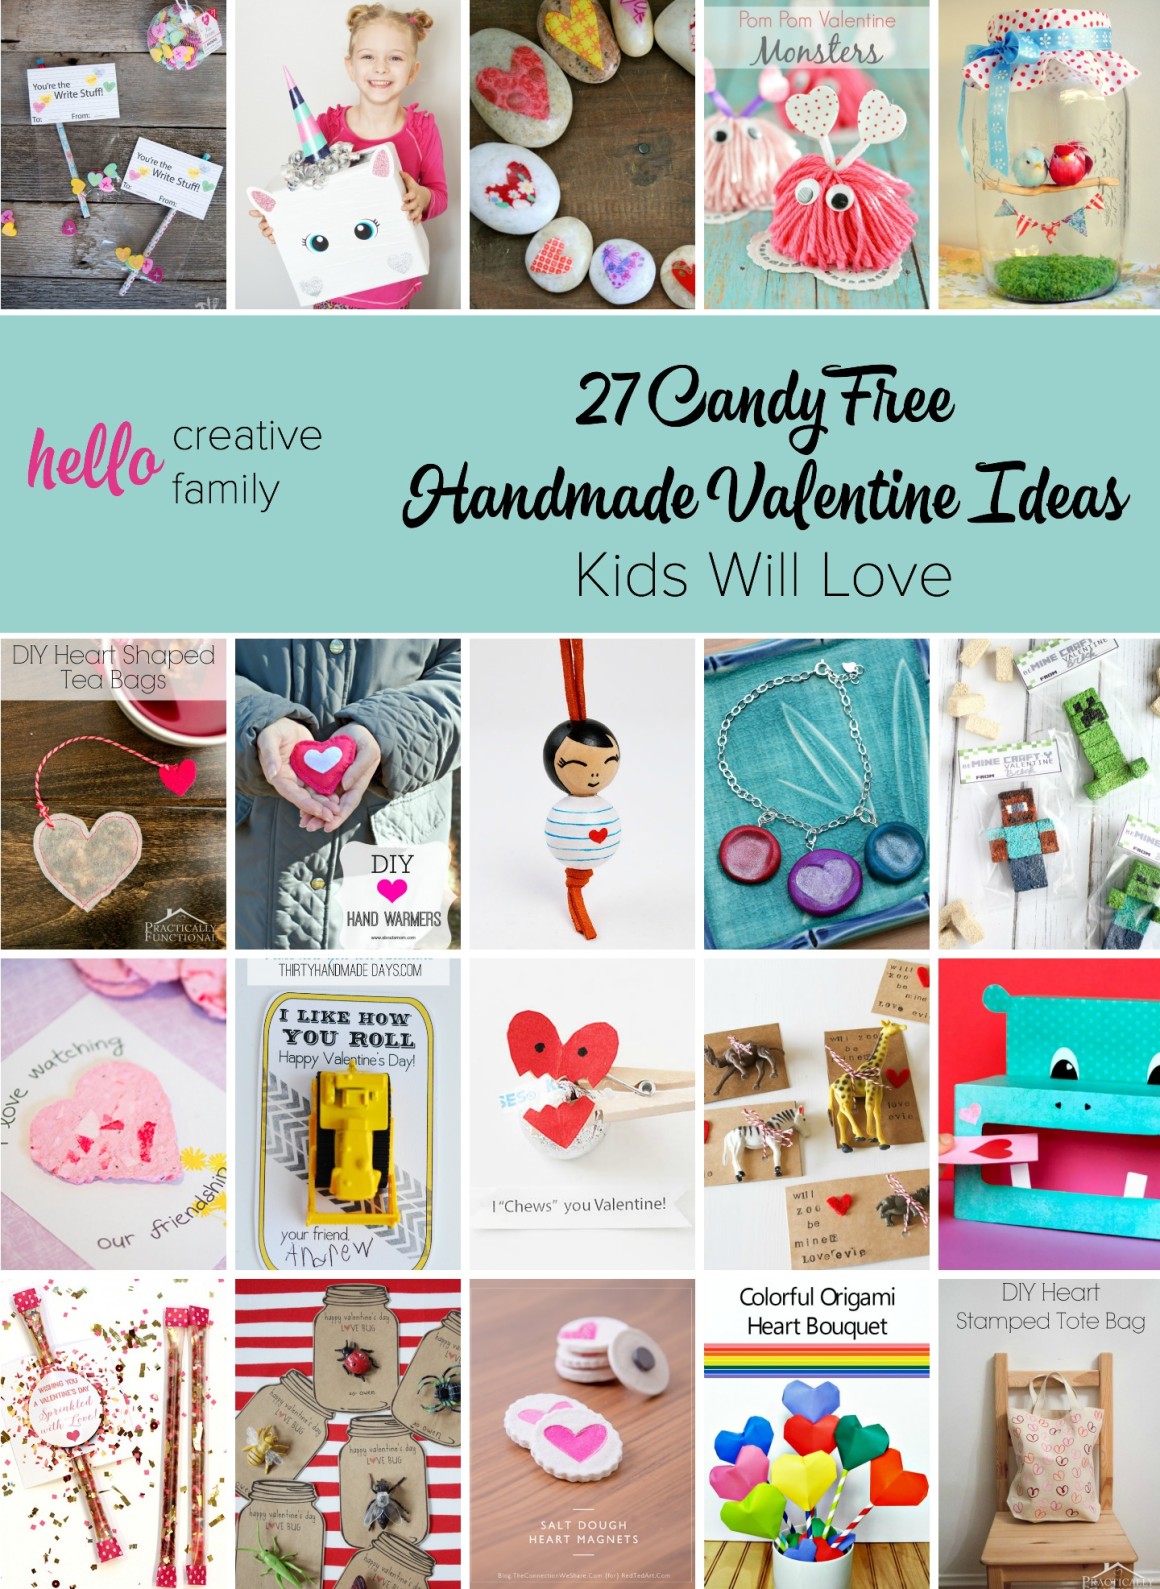 I'm so tired of all the candy that fills my house each holiday! Here are 27 amazing candy free handmade Valentine Ideas that kids will love